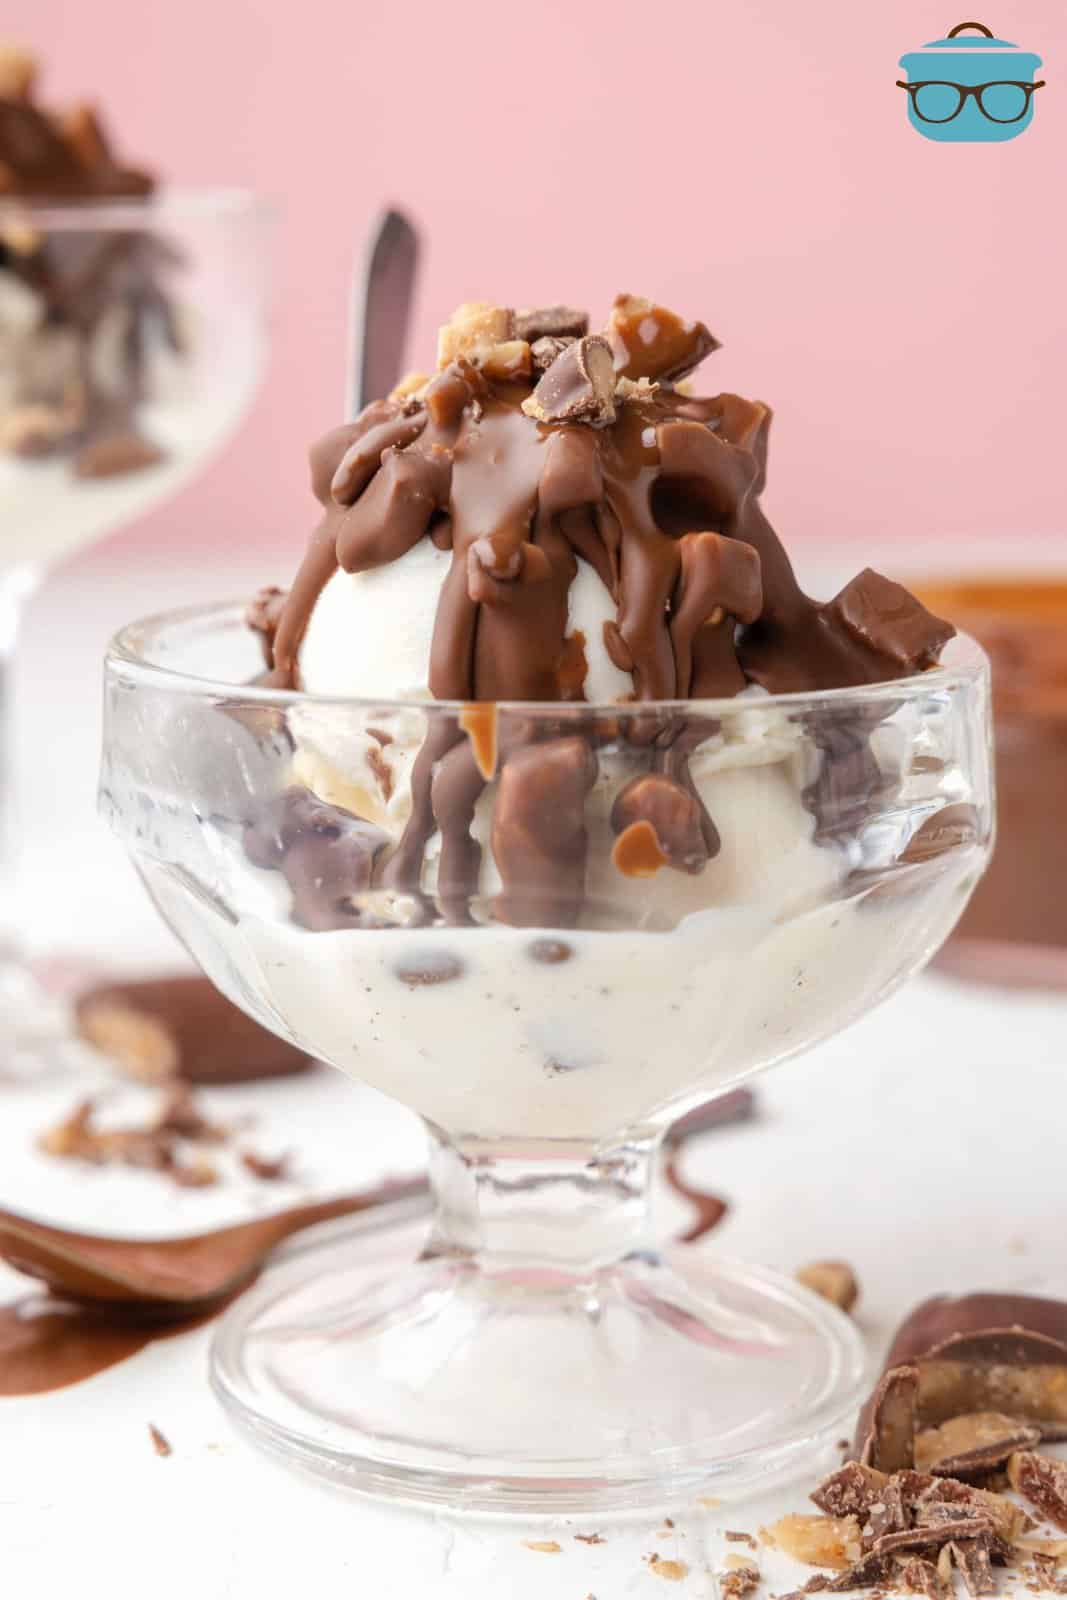 Heath Bar Magic Shell poured over ice cream in parfait cup.